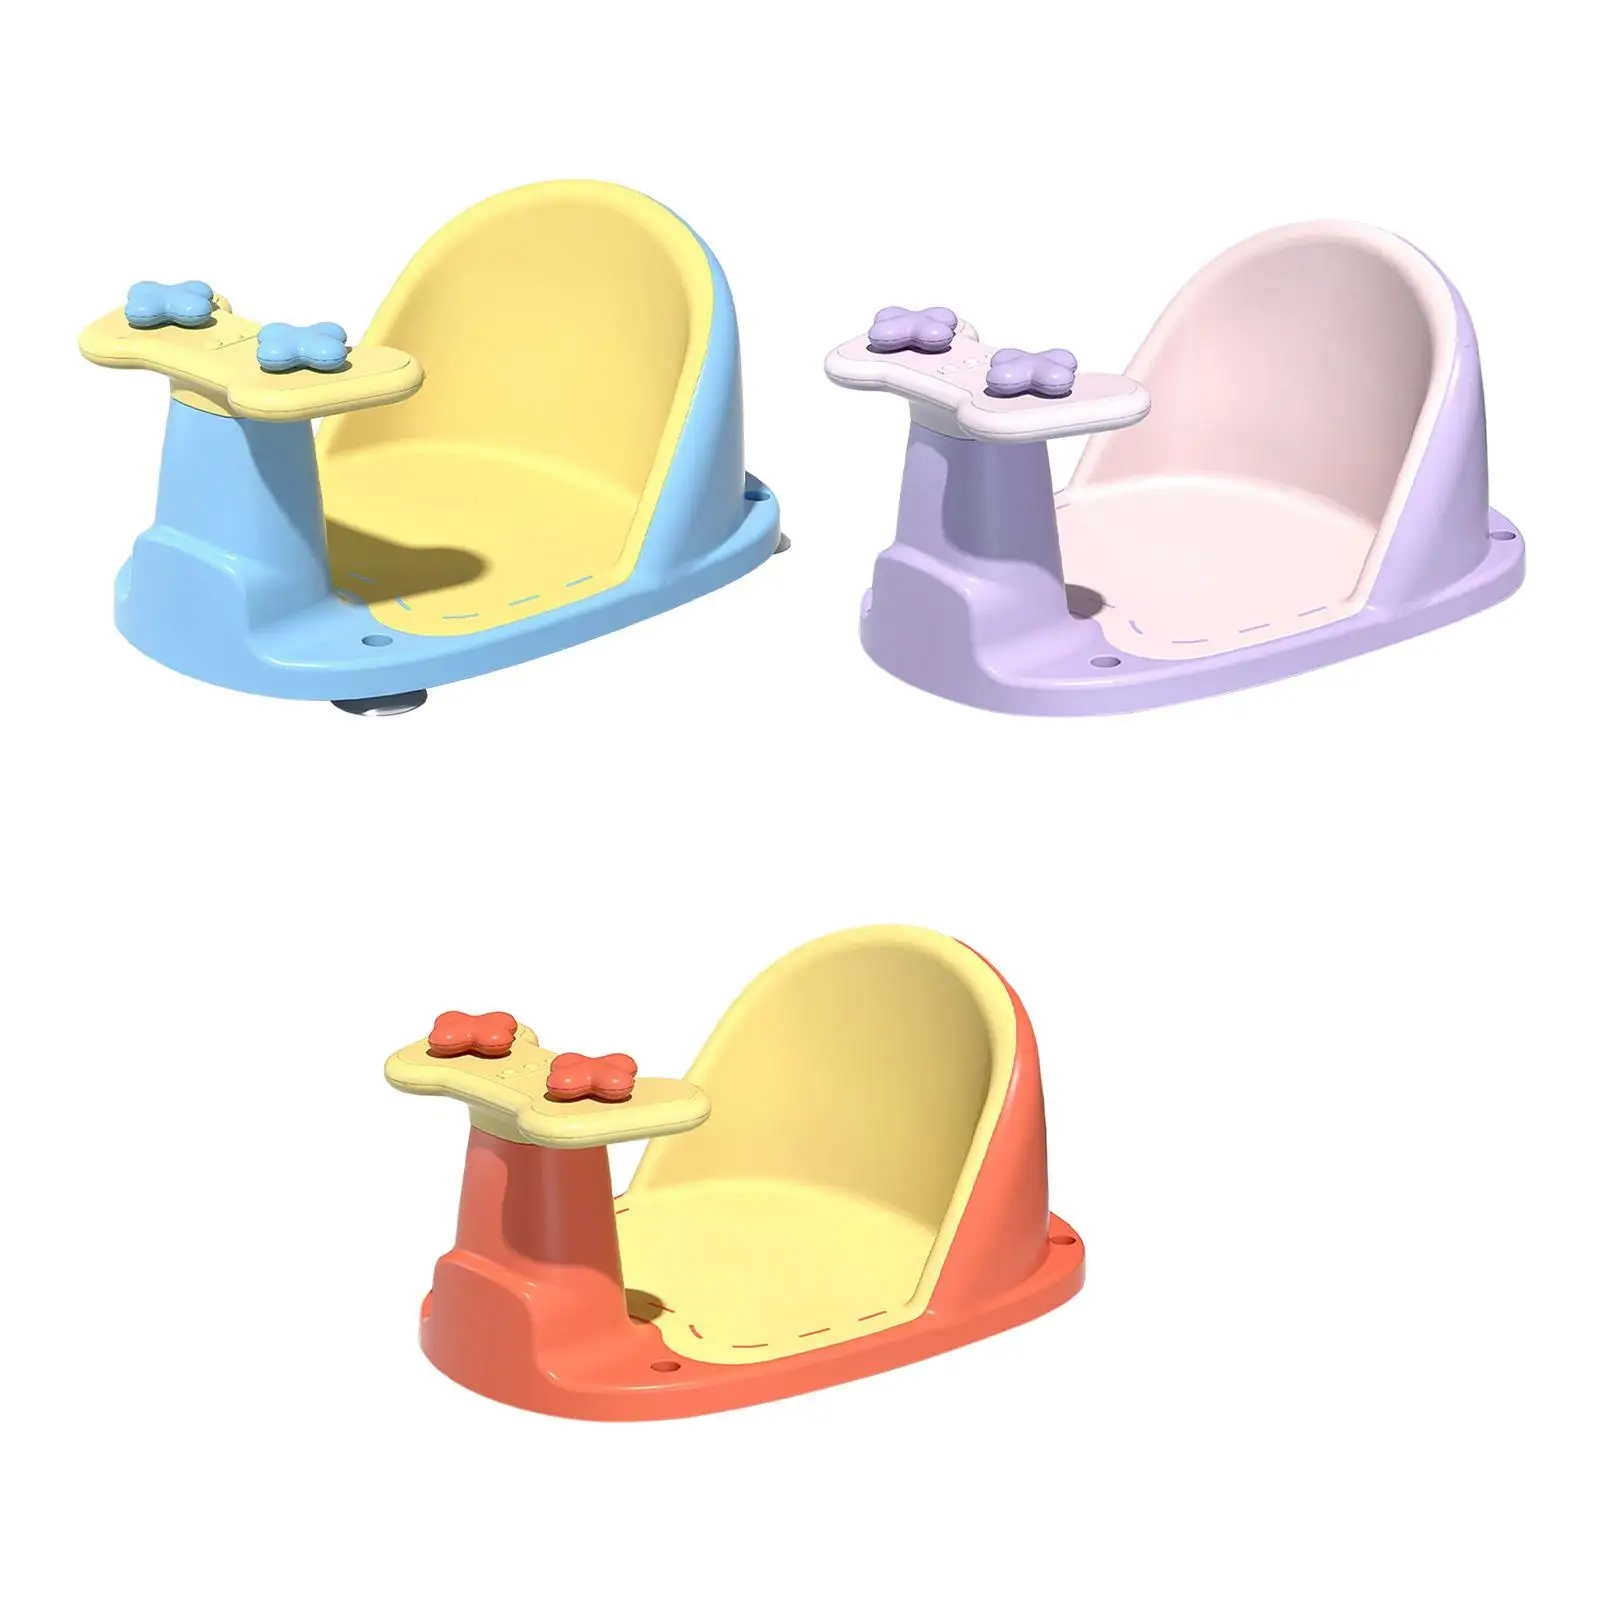 Anti Slip Baby Bathtub Seat Bathtub Chair with Suction Cup Backrest Support for Boys Girls Toddlers 6-18 Months Kids Infant